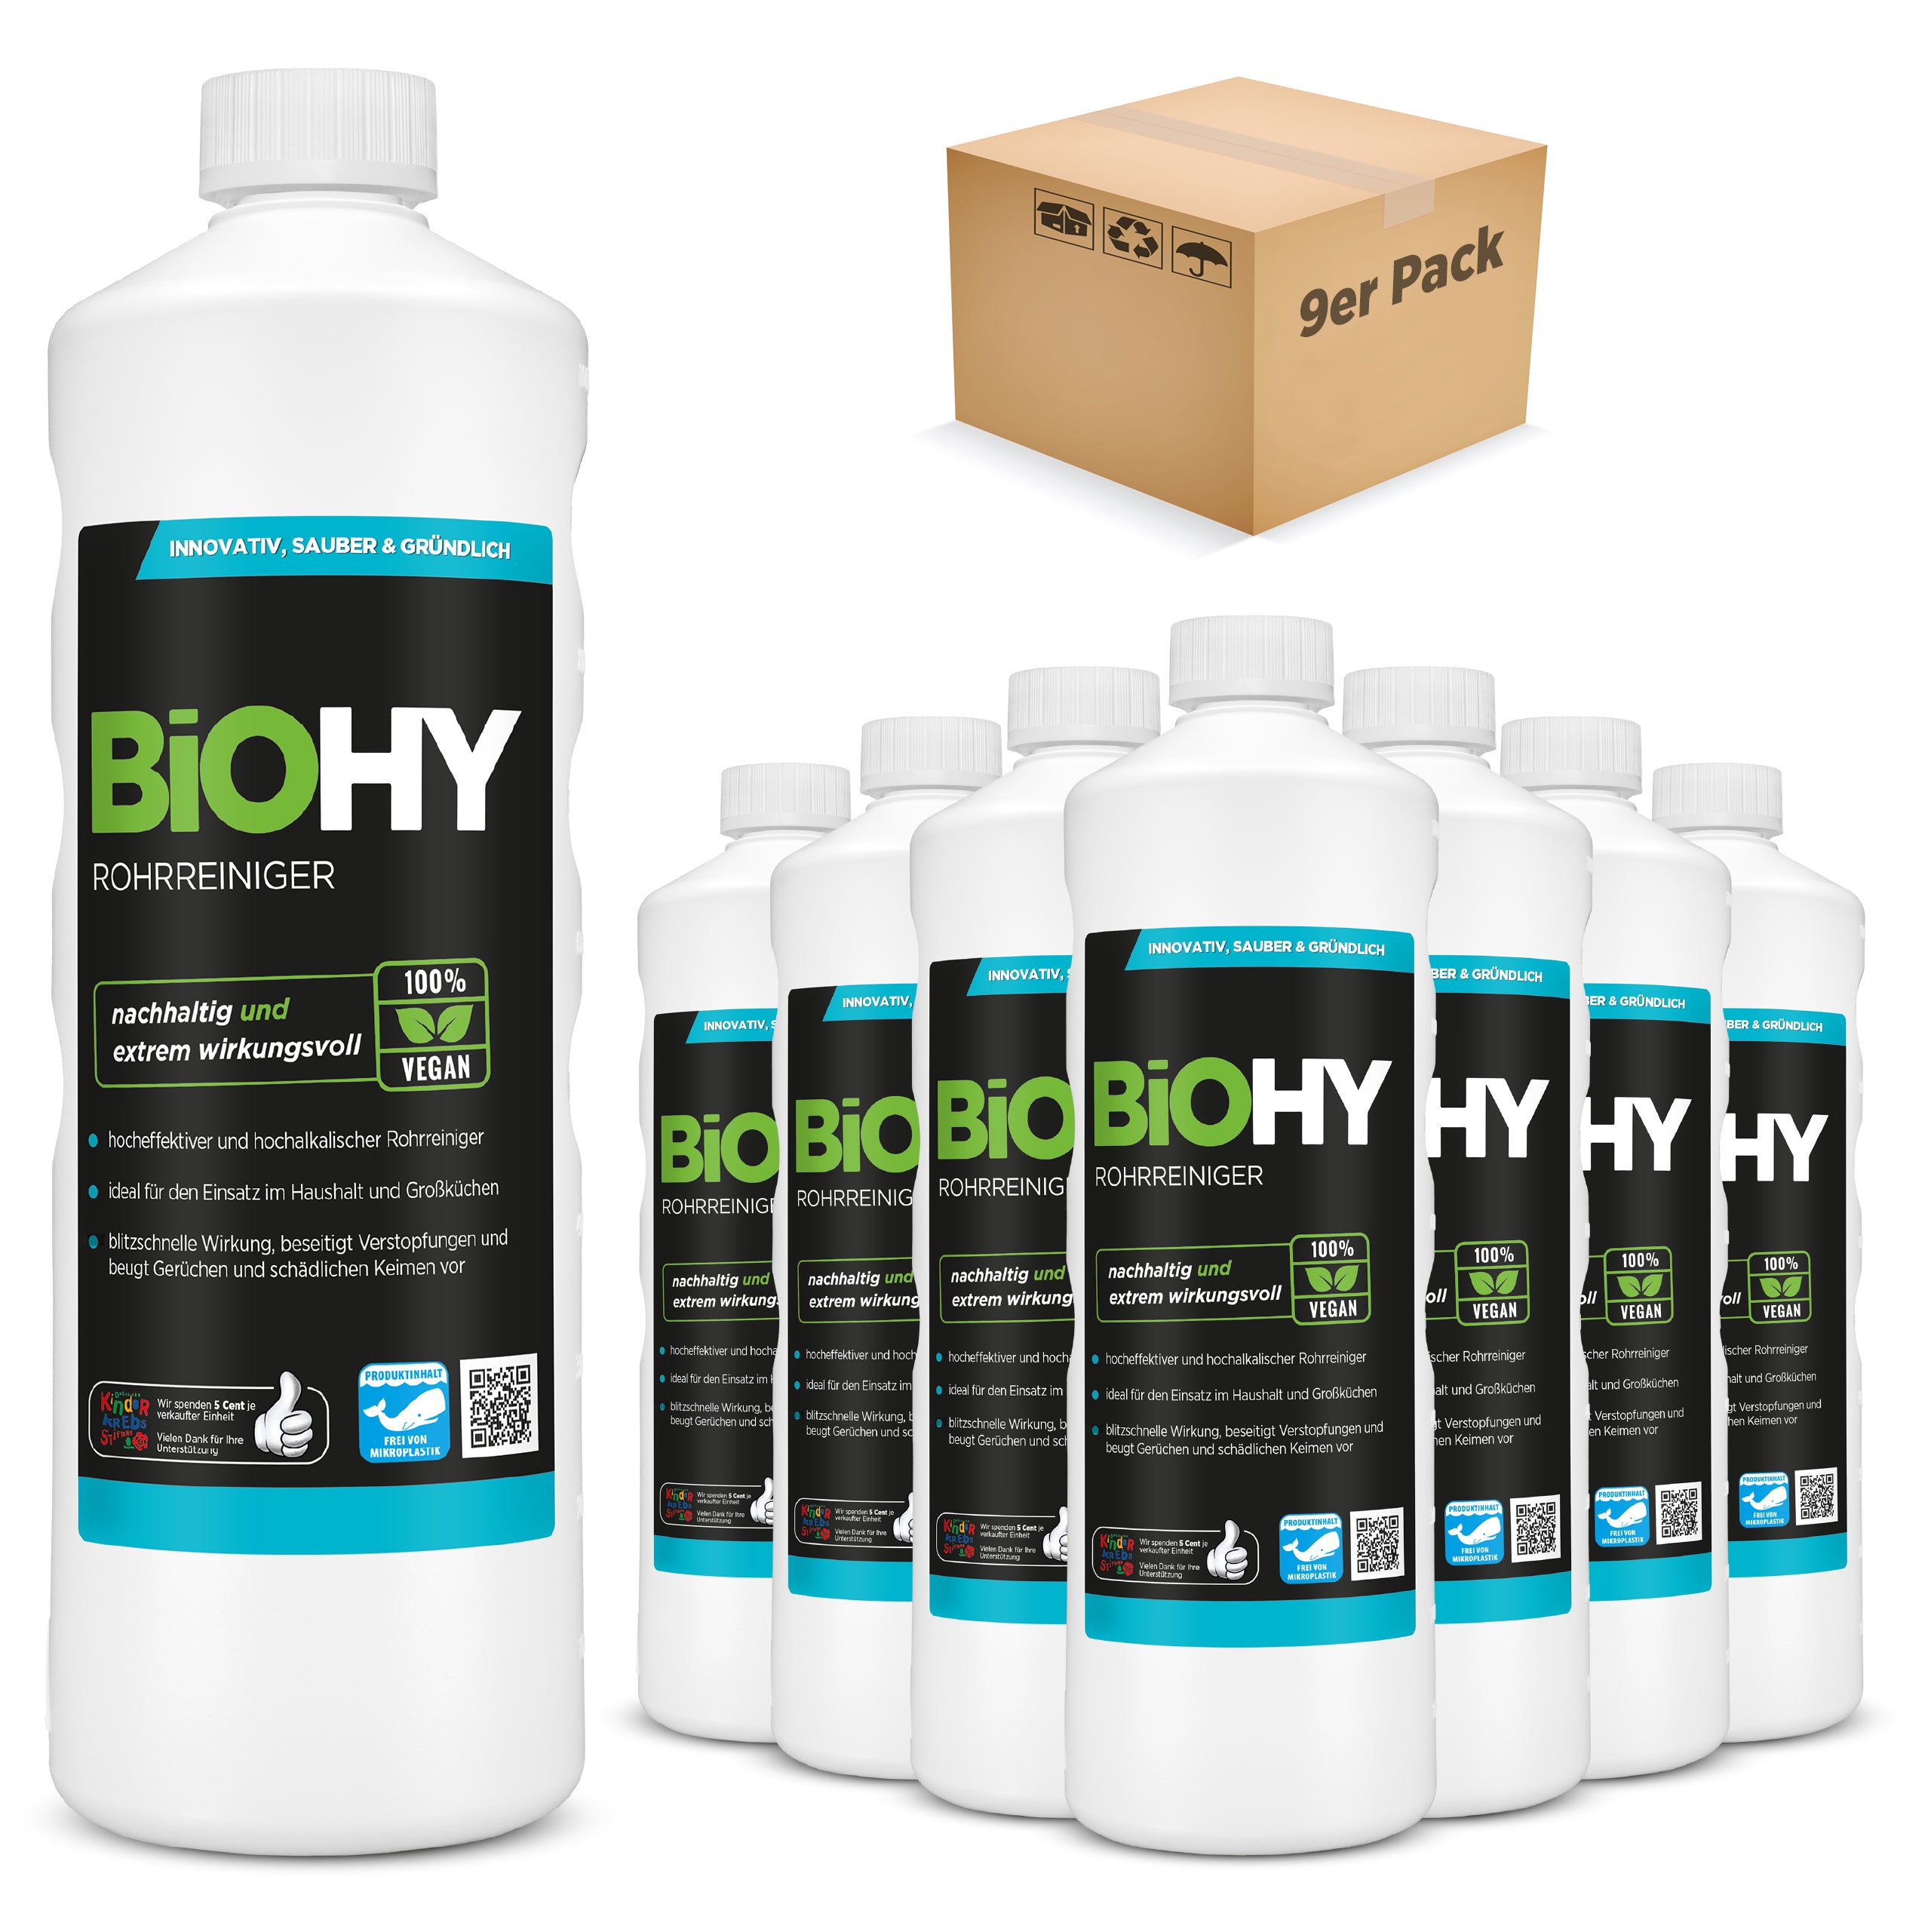 BiOHY pipe cleaner, drain cleaner, raw-free agent, professional concentrate